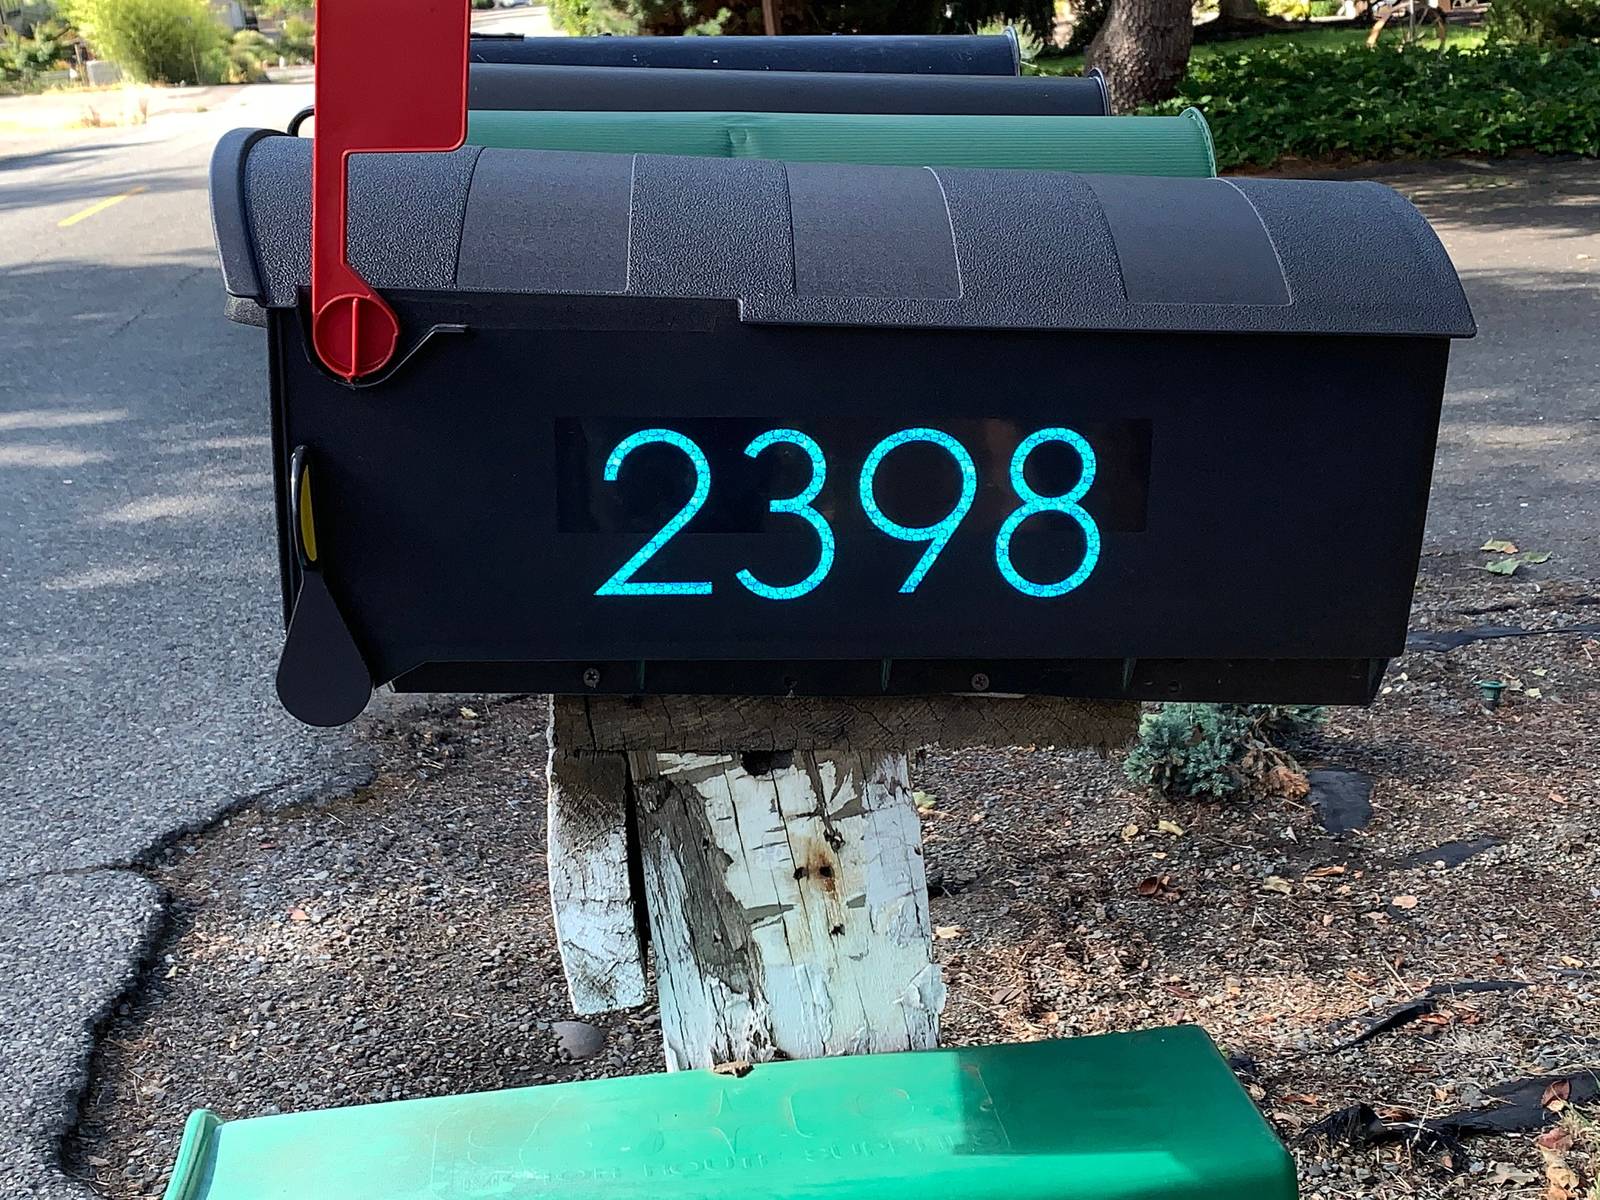 Ultra-reflective Mailbox Numbers (Single set of numbers) - $20.00 - $26.00